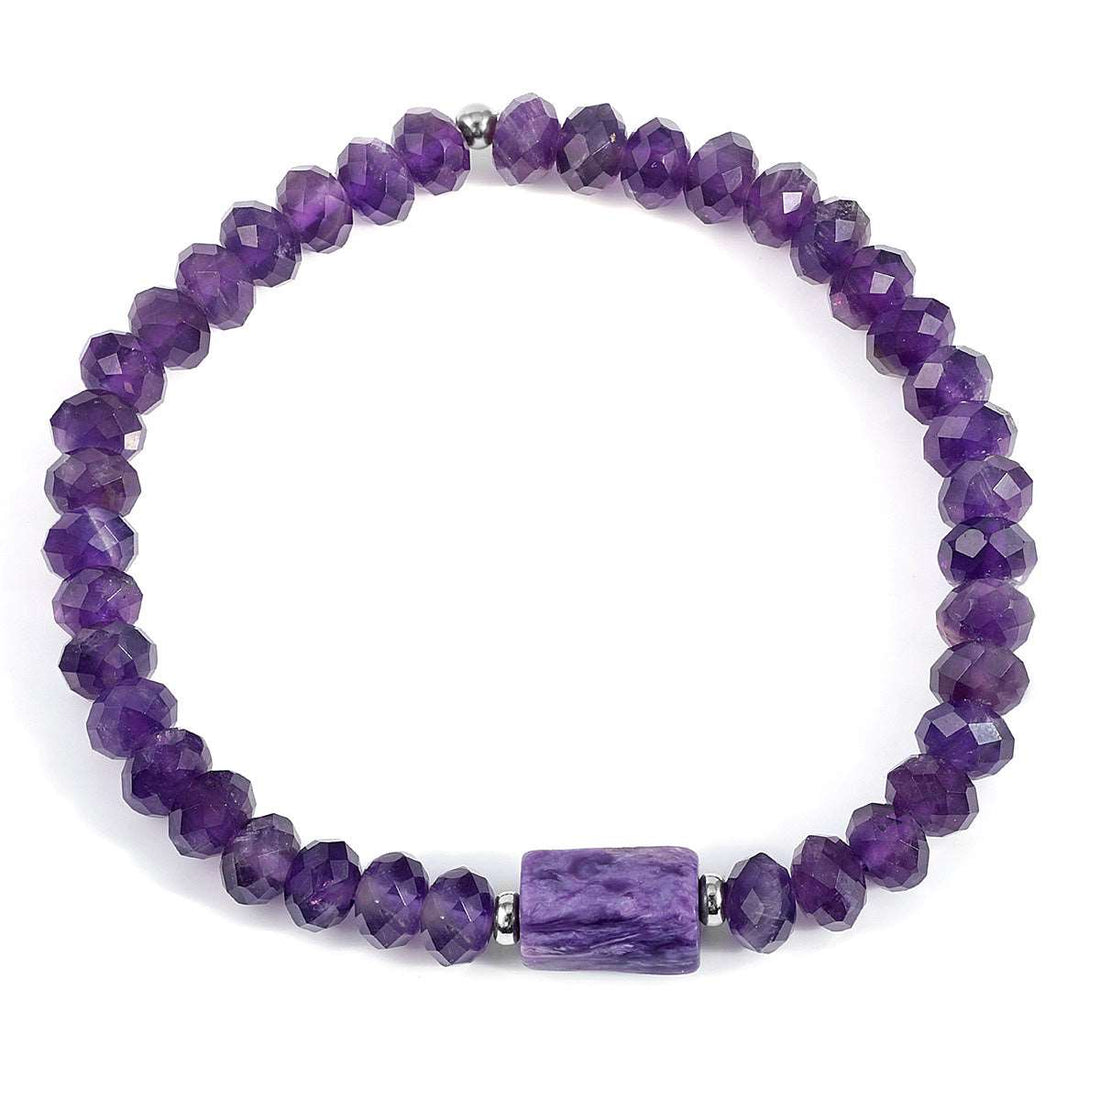 Amethyst and Charoite Stretch Bracelet